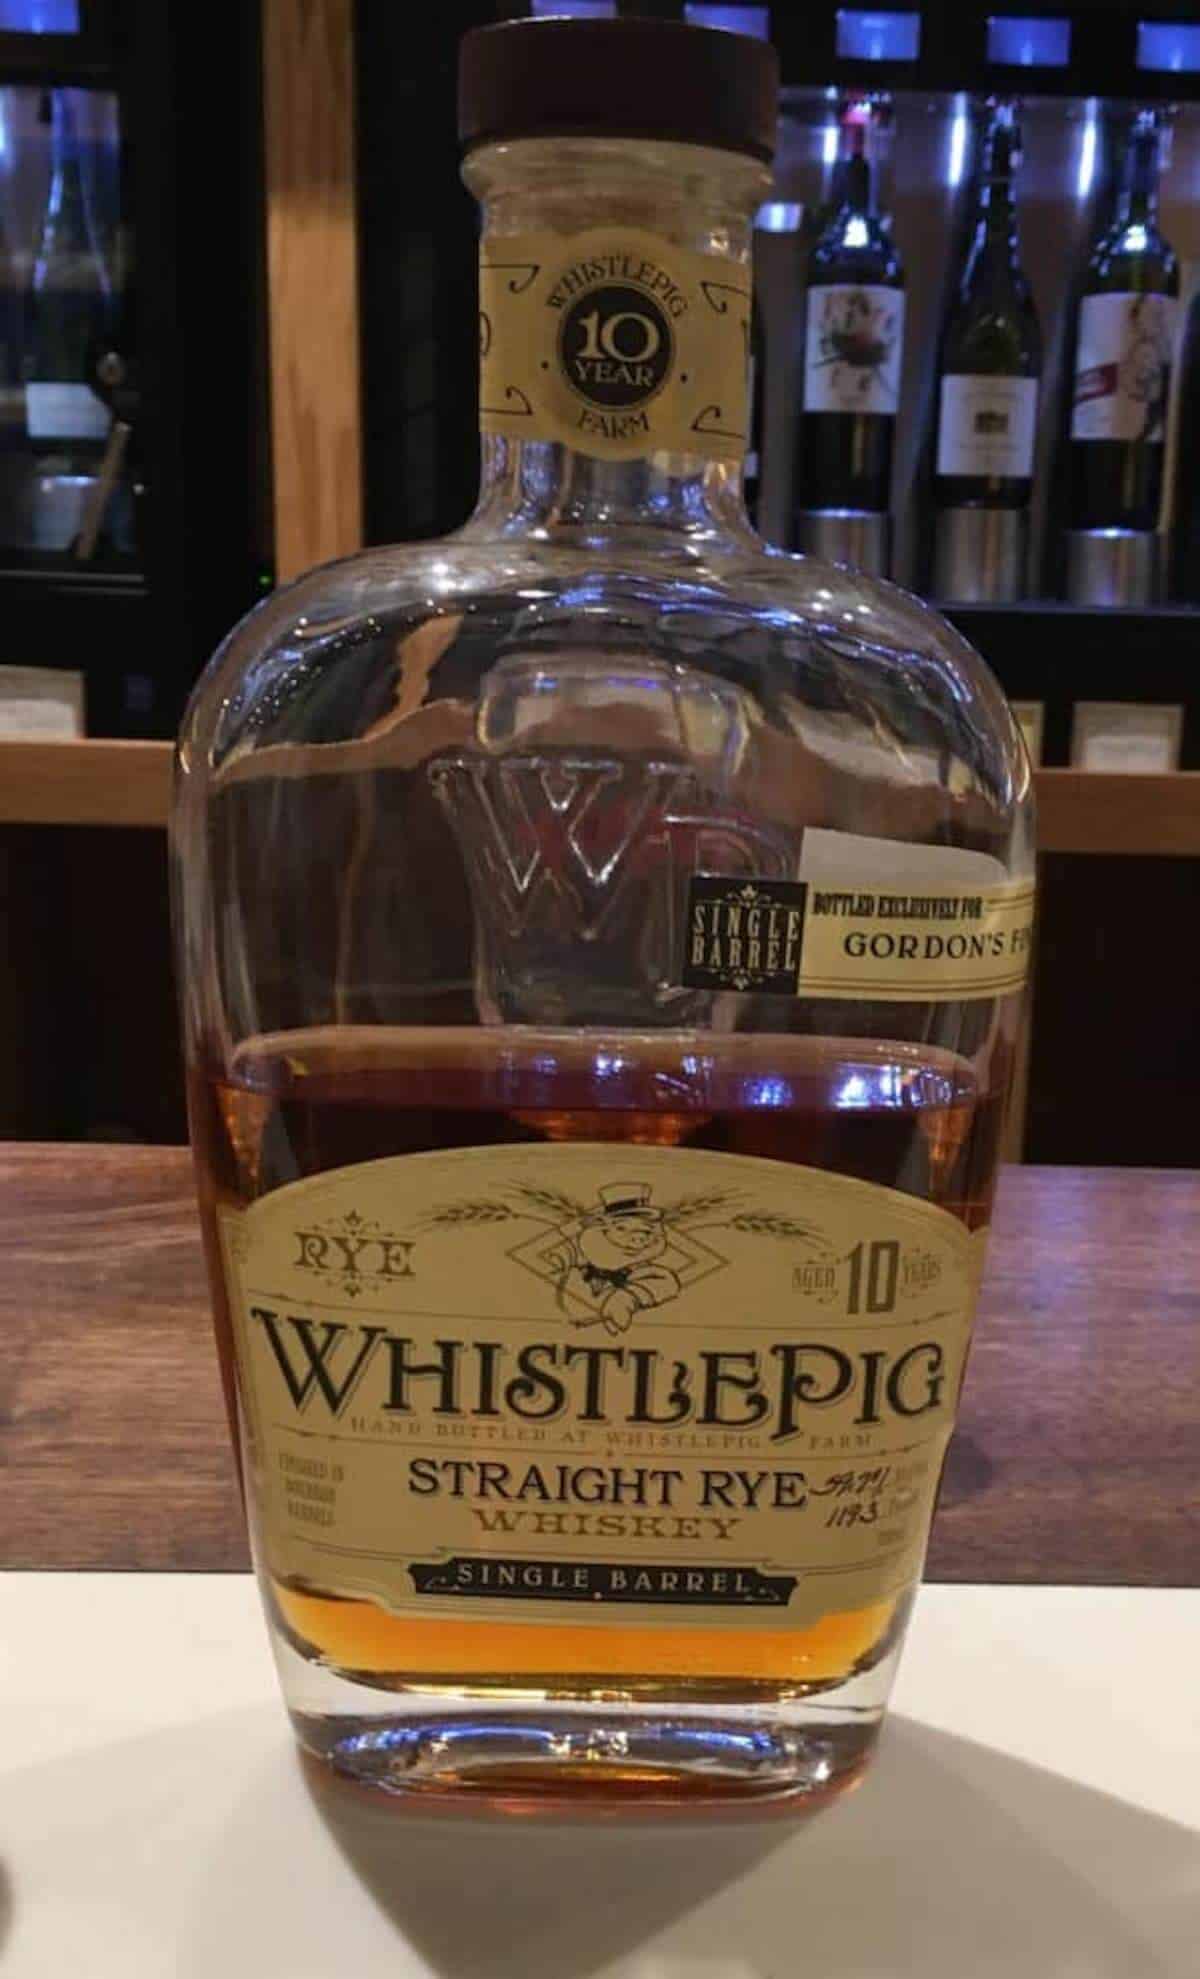 WhistlePig Straight Rye Whiskey 10 year bottle on a counter.